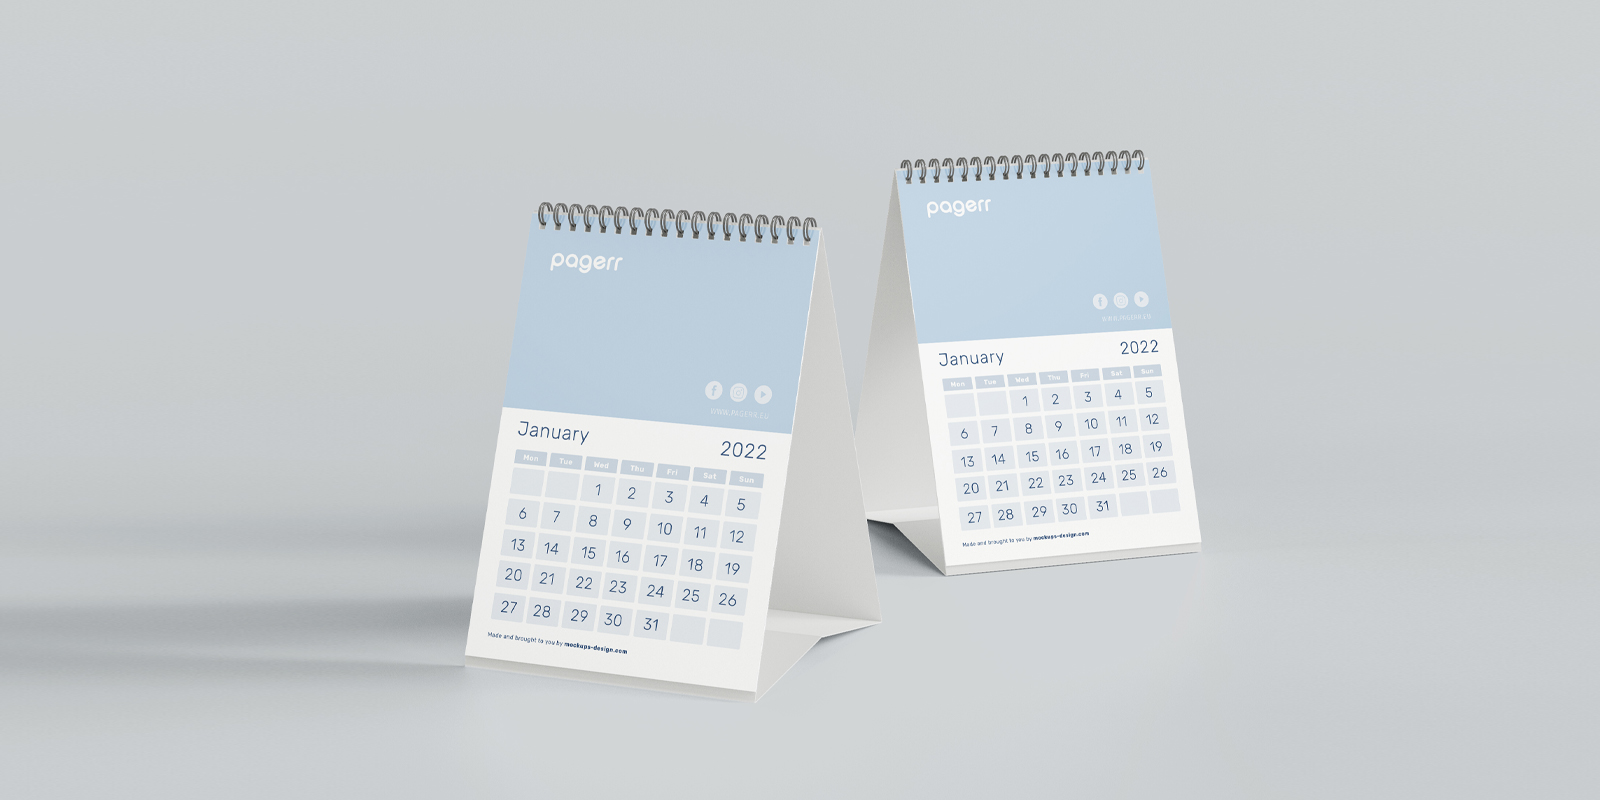 Desk calendars in Paris - Print with Pagerr